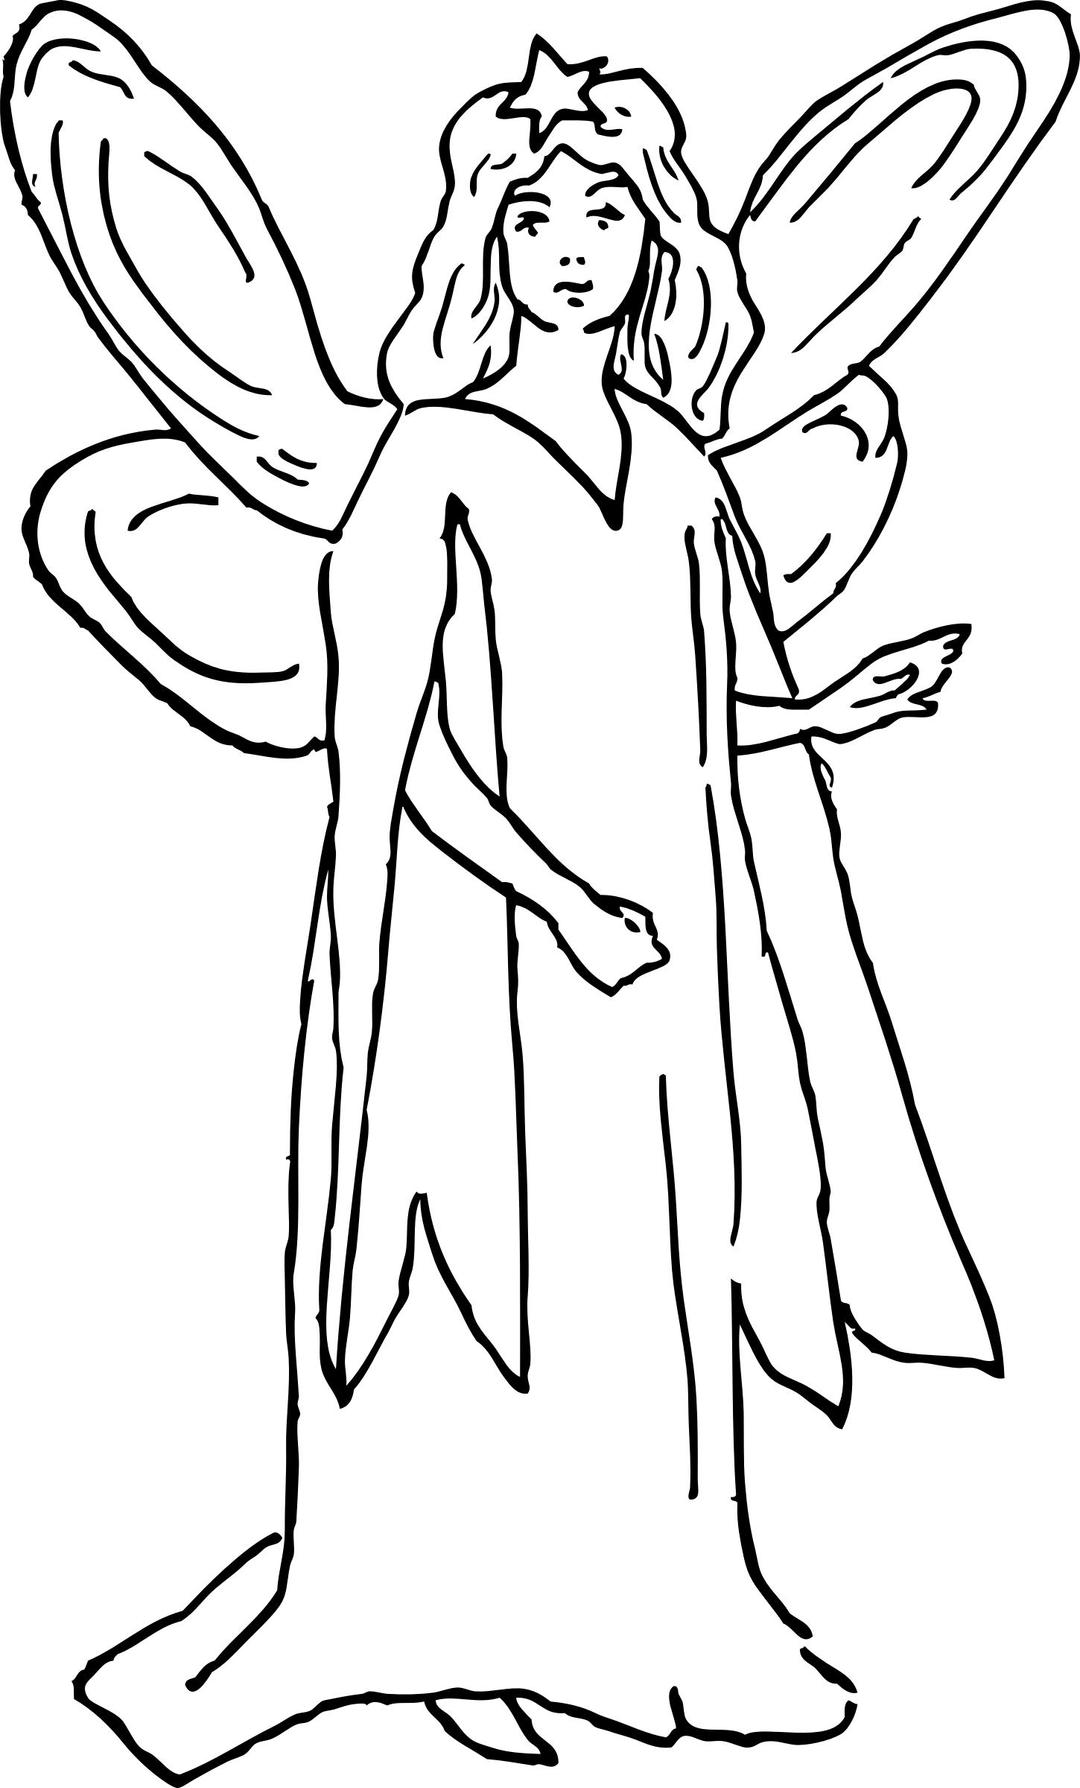 a character representing hope png transparent